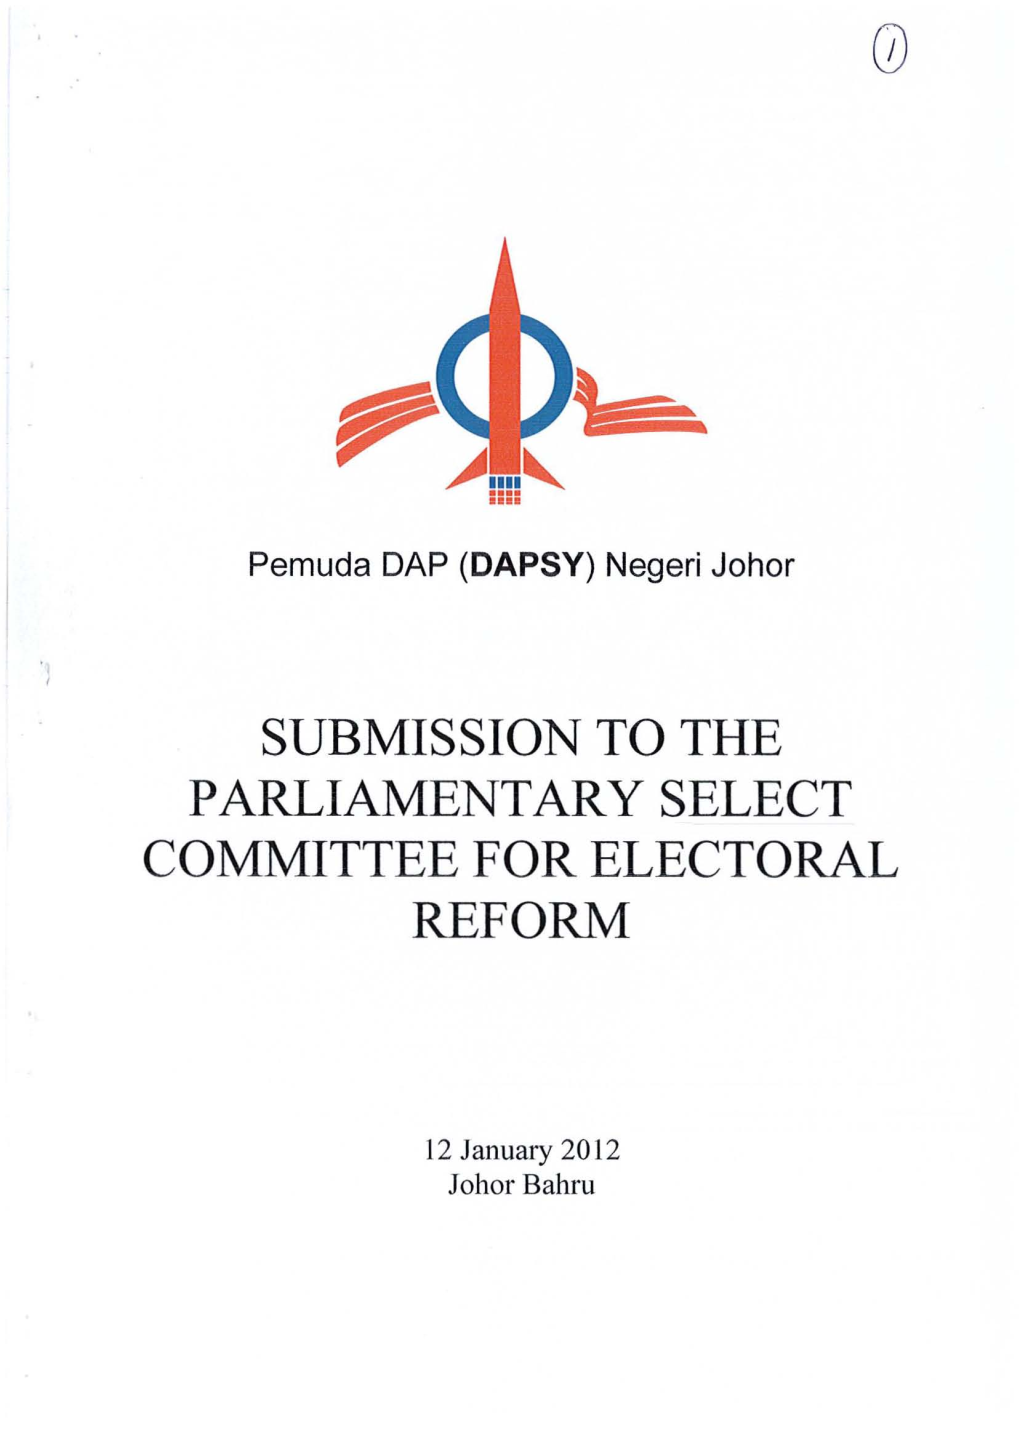 Submission to the Parliamentary Select Committee for Electoral Reform